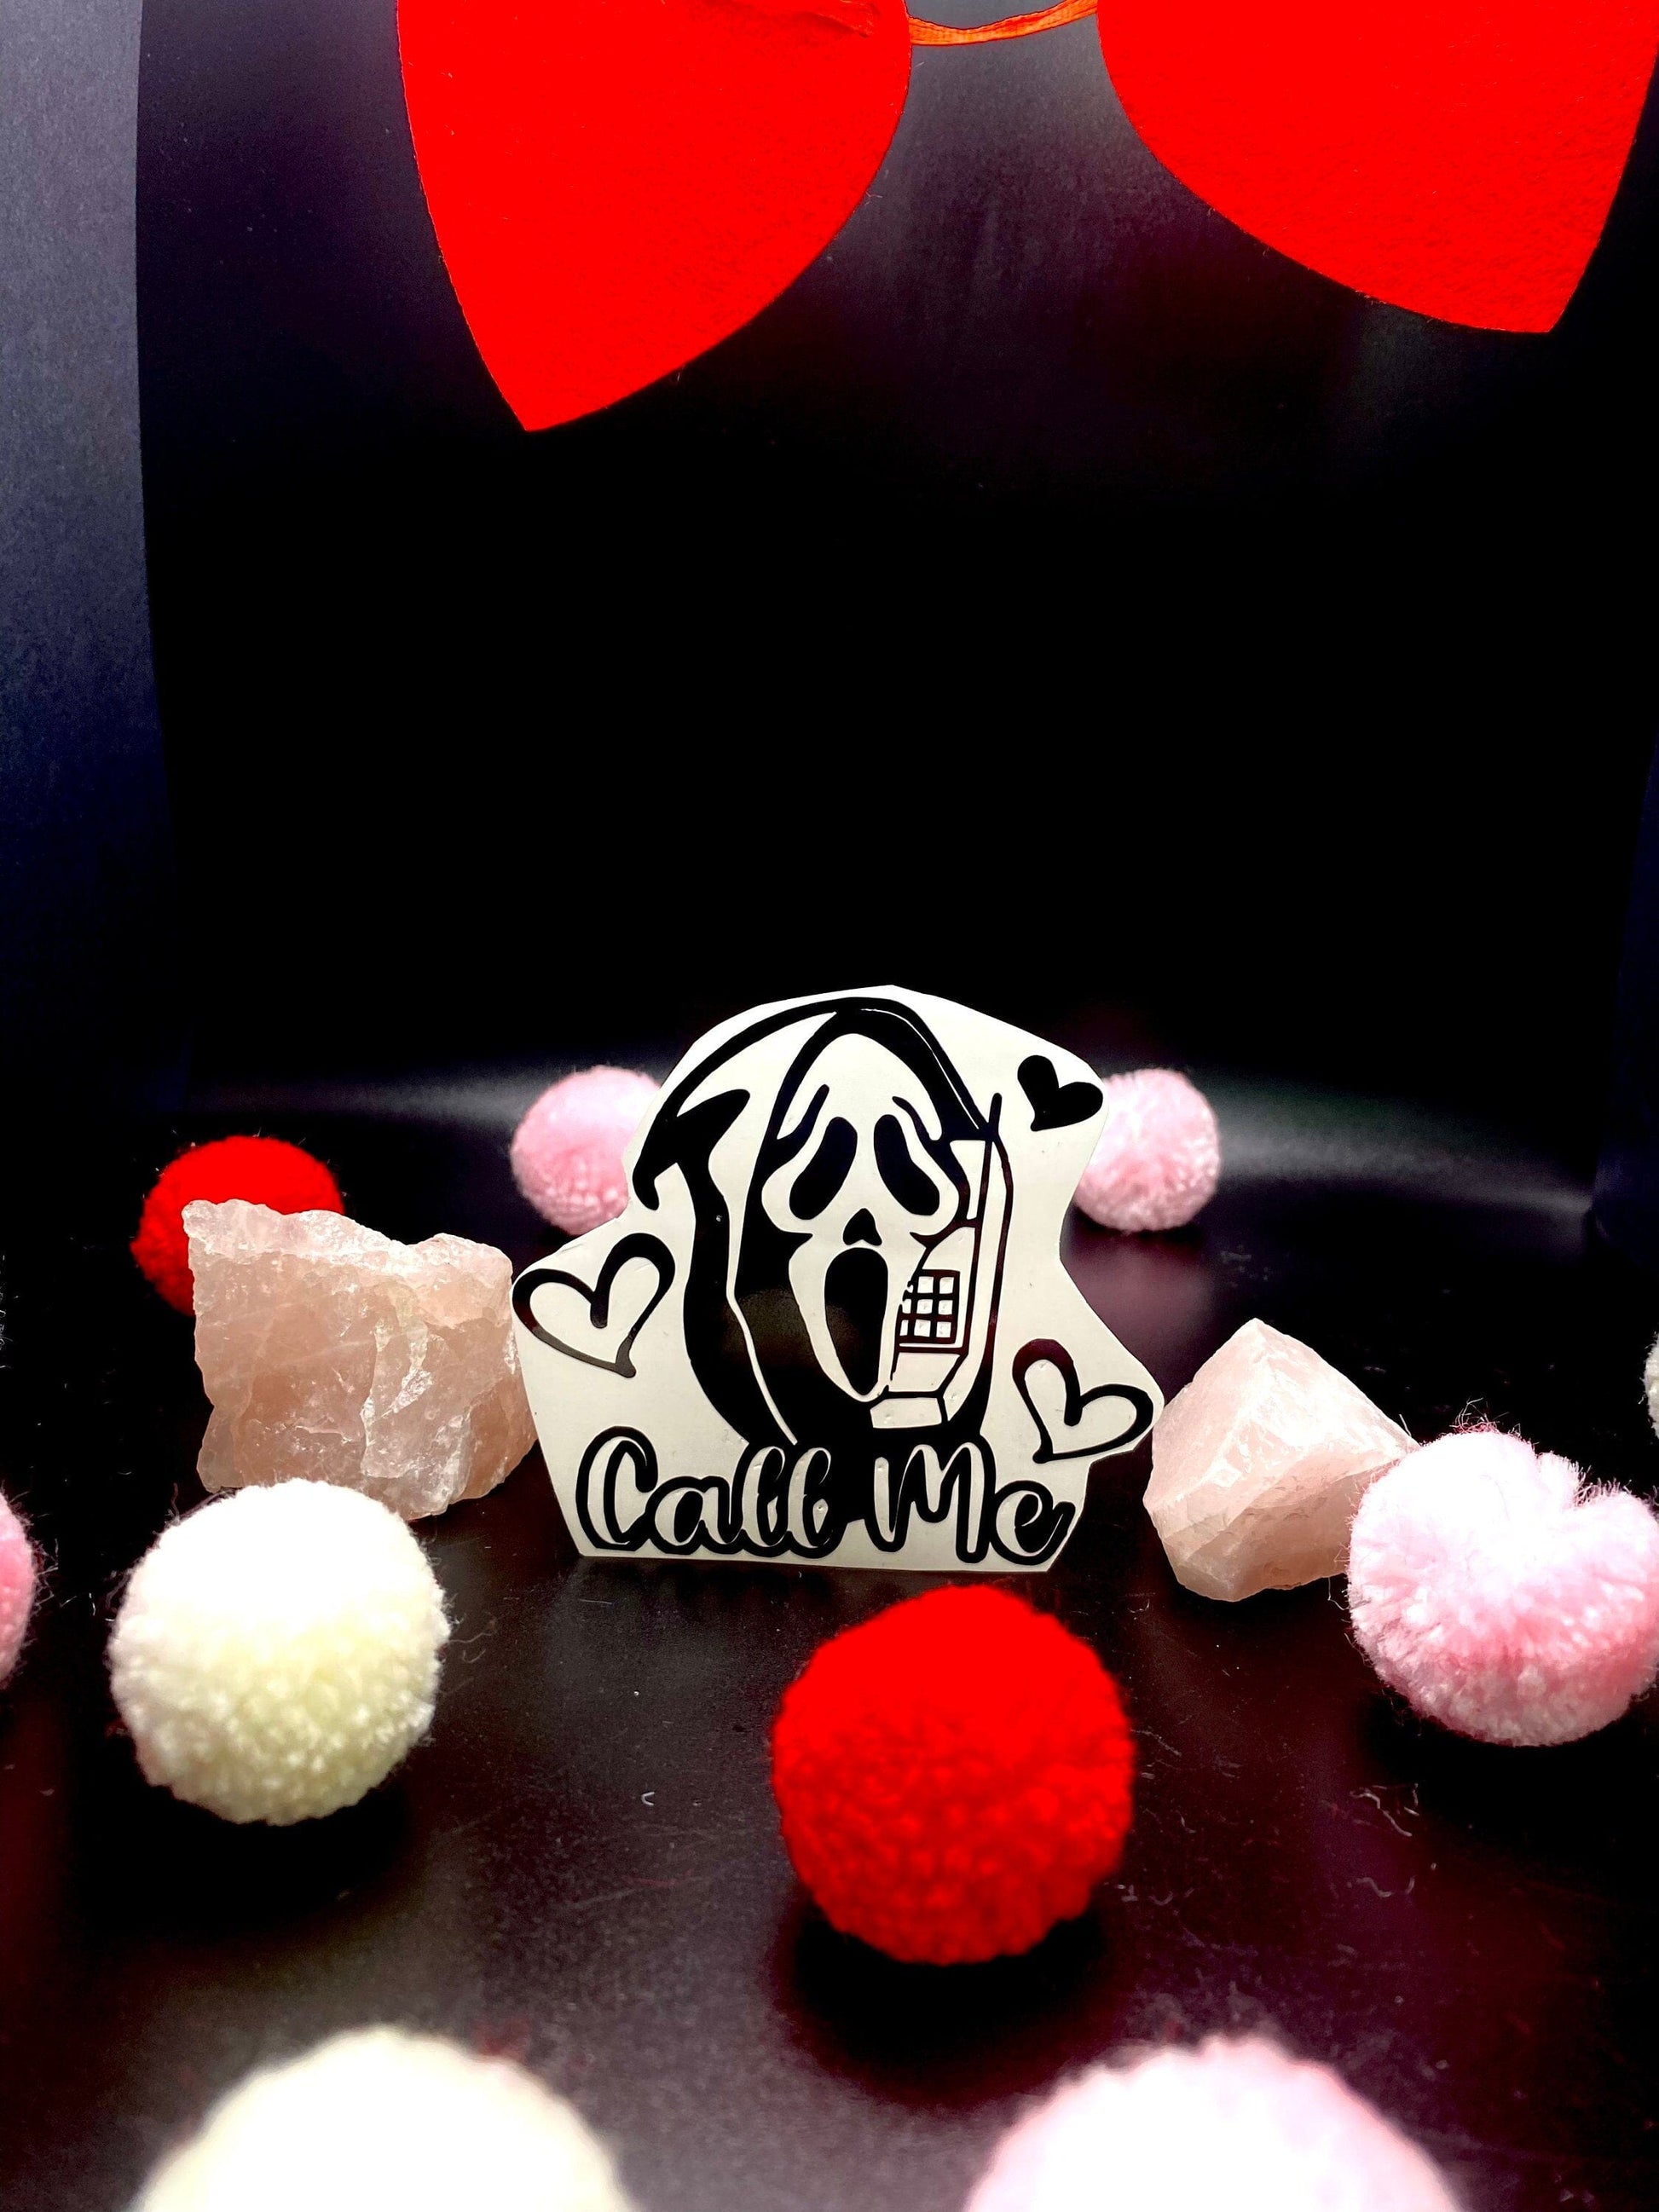 Shadow Witch Designs 1. holographic opal Scream Ghostface Call Me Horror Valentine Vinyl Decal 13460439430